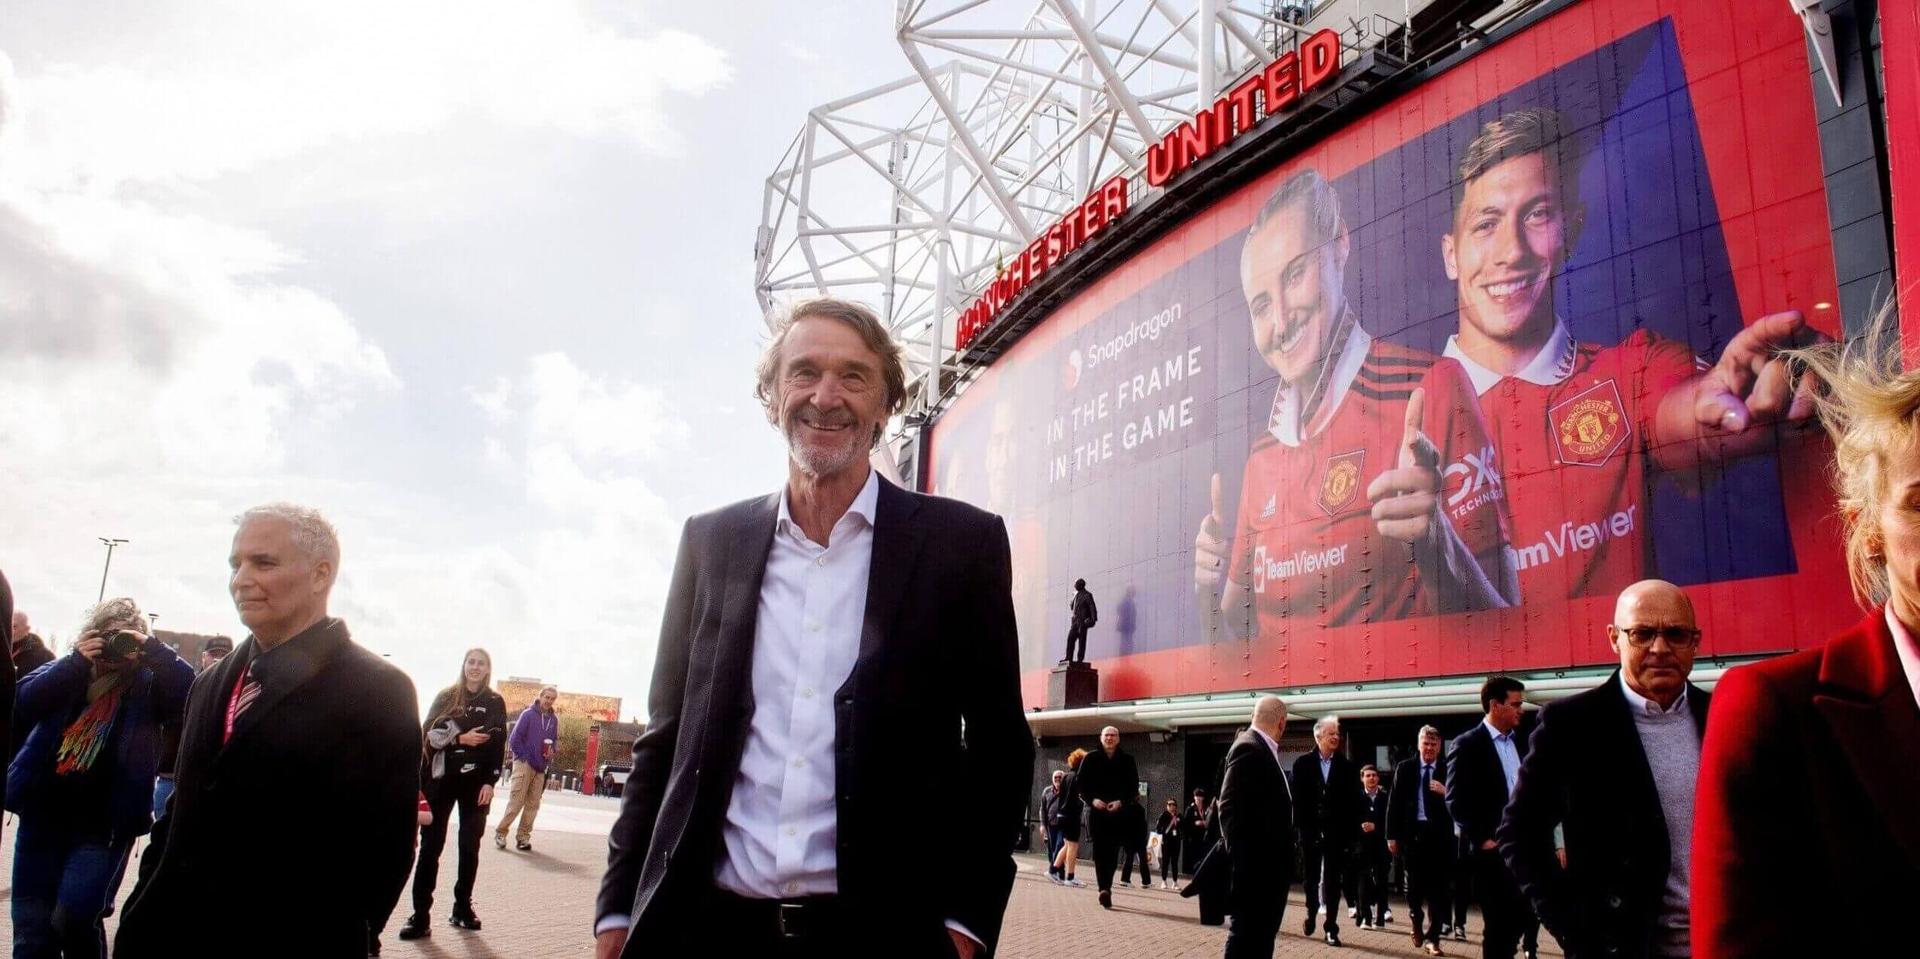 'A beautiful football club is being ripped apart' - Can Jim Ratcliffe really fix Man United?